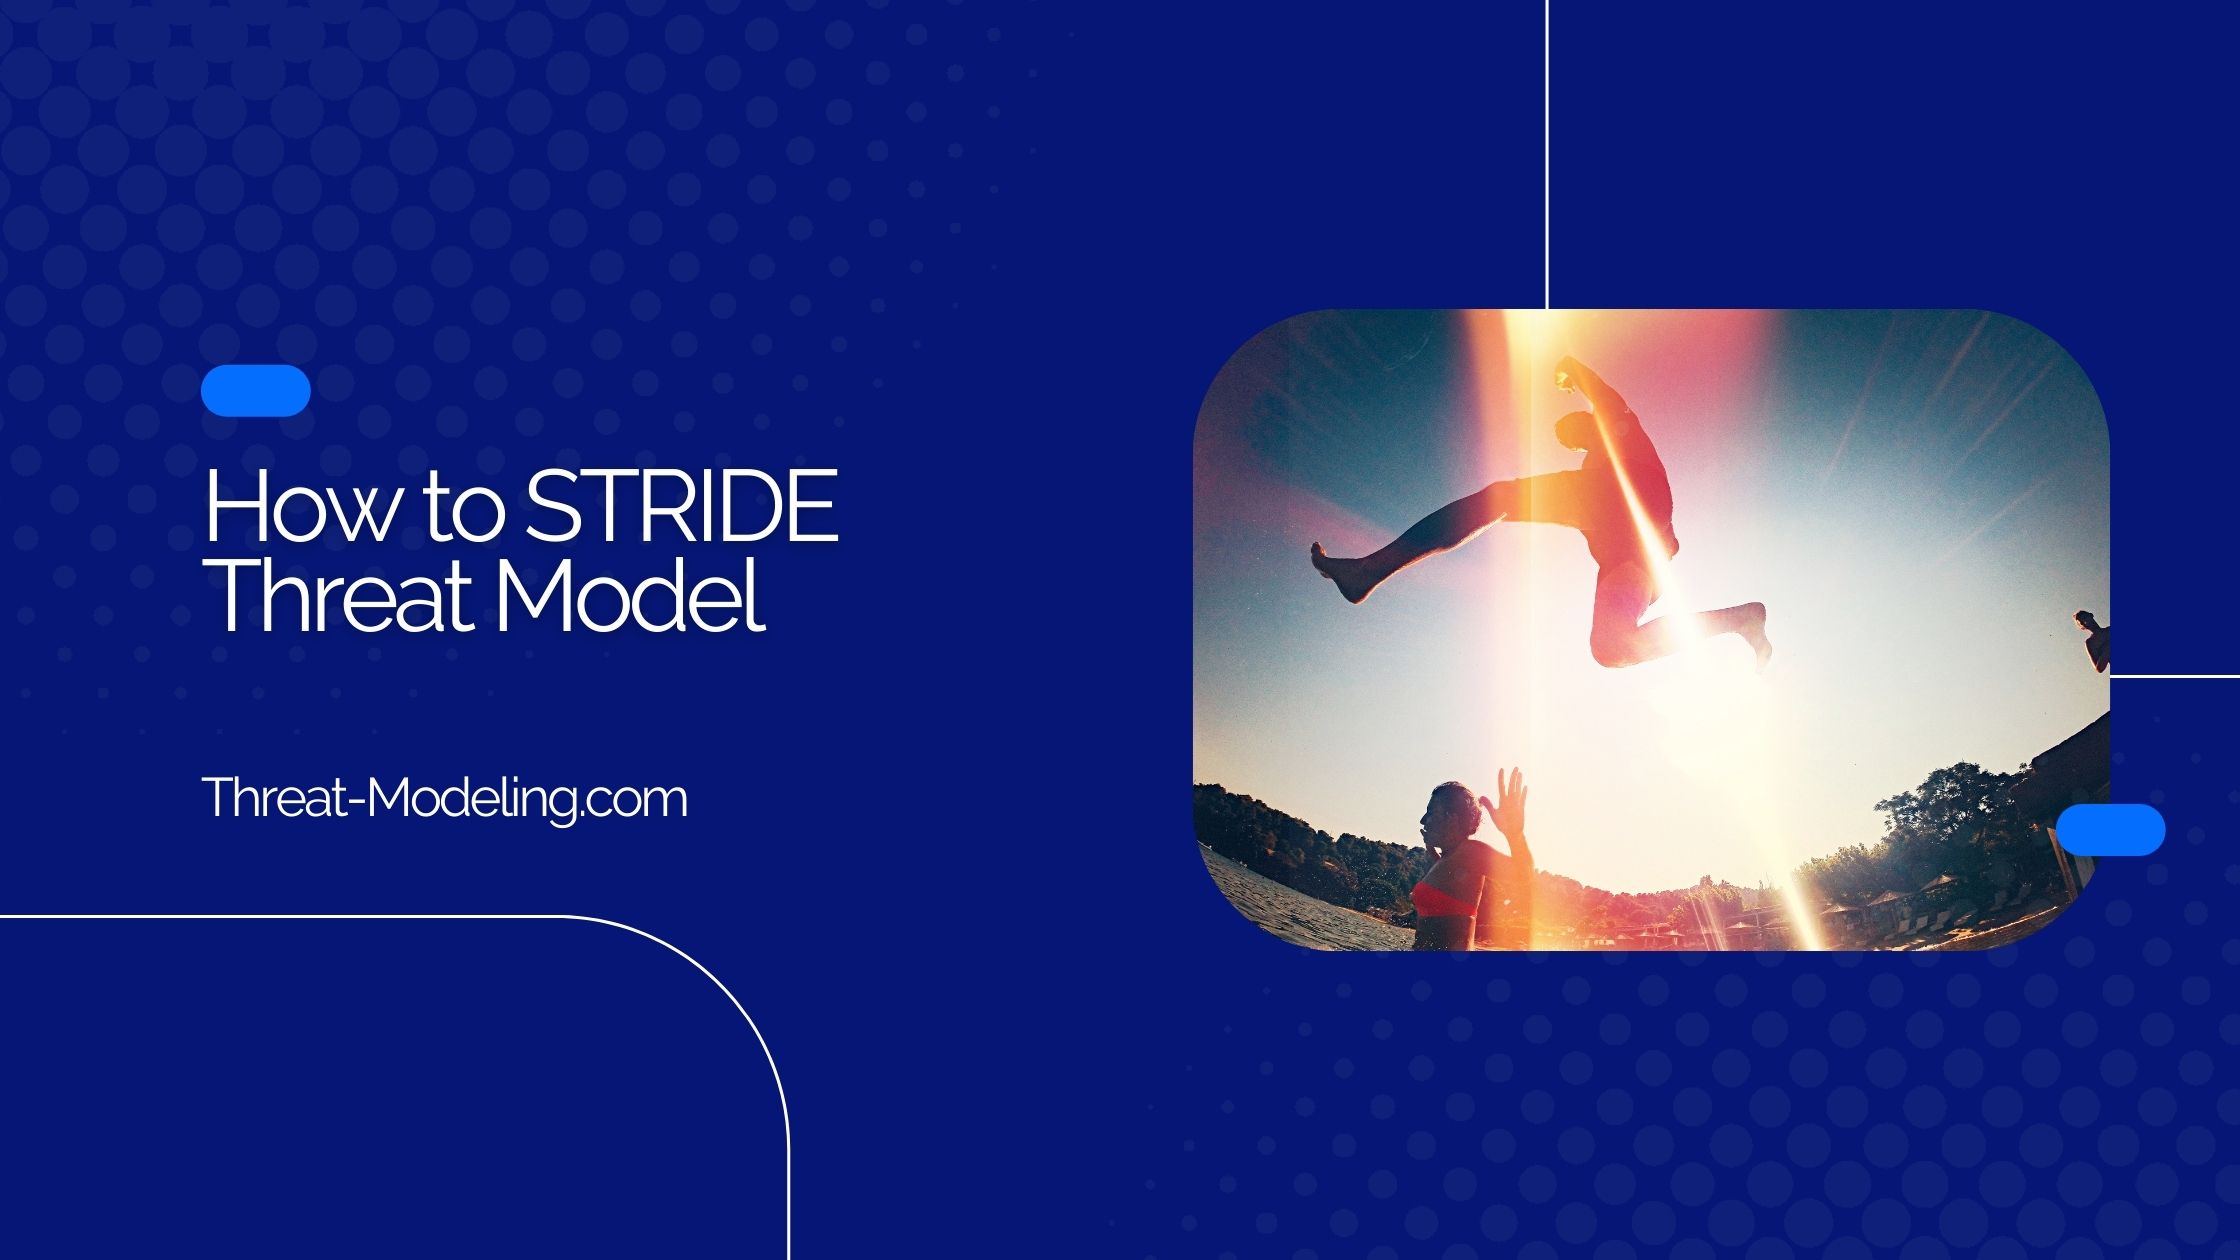 How to STRIDE threat model